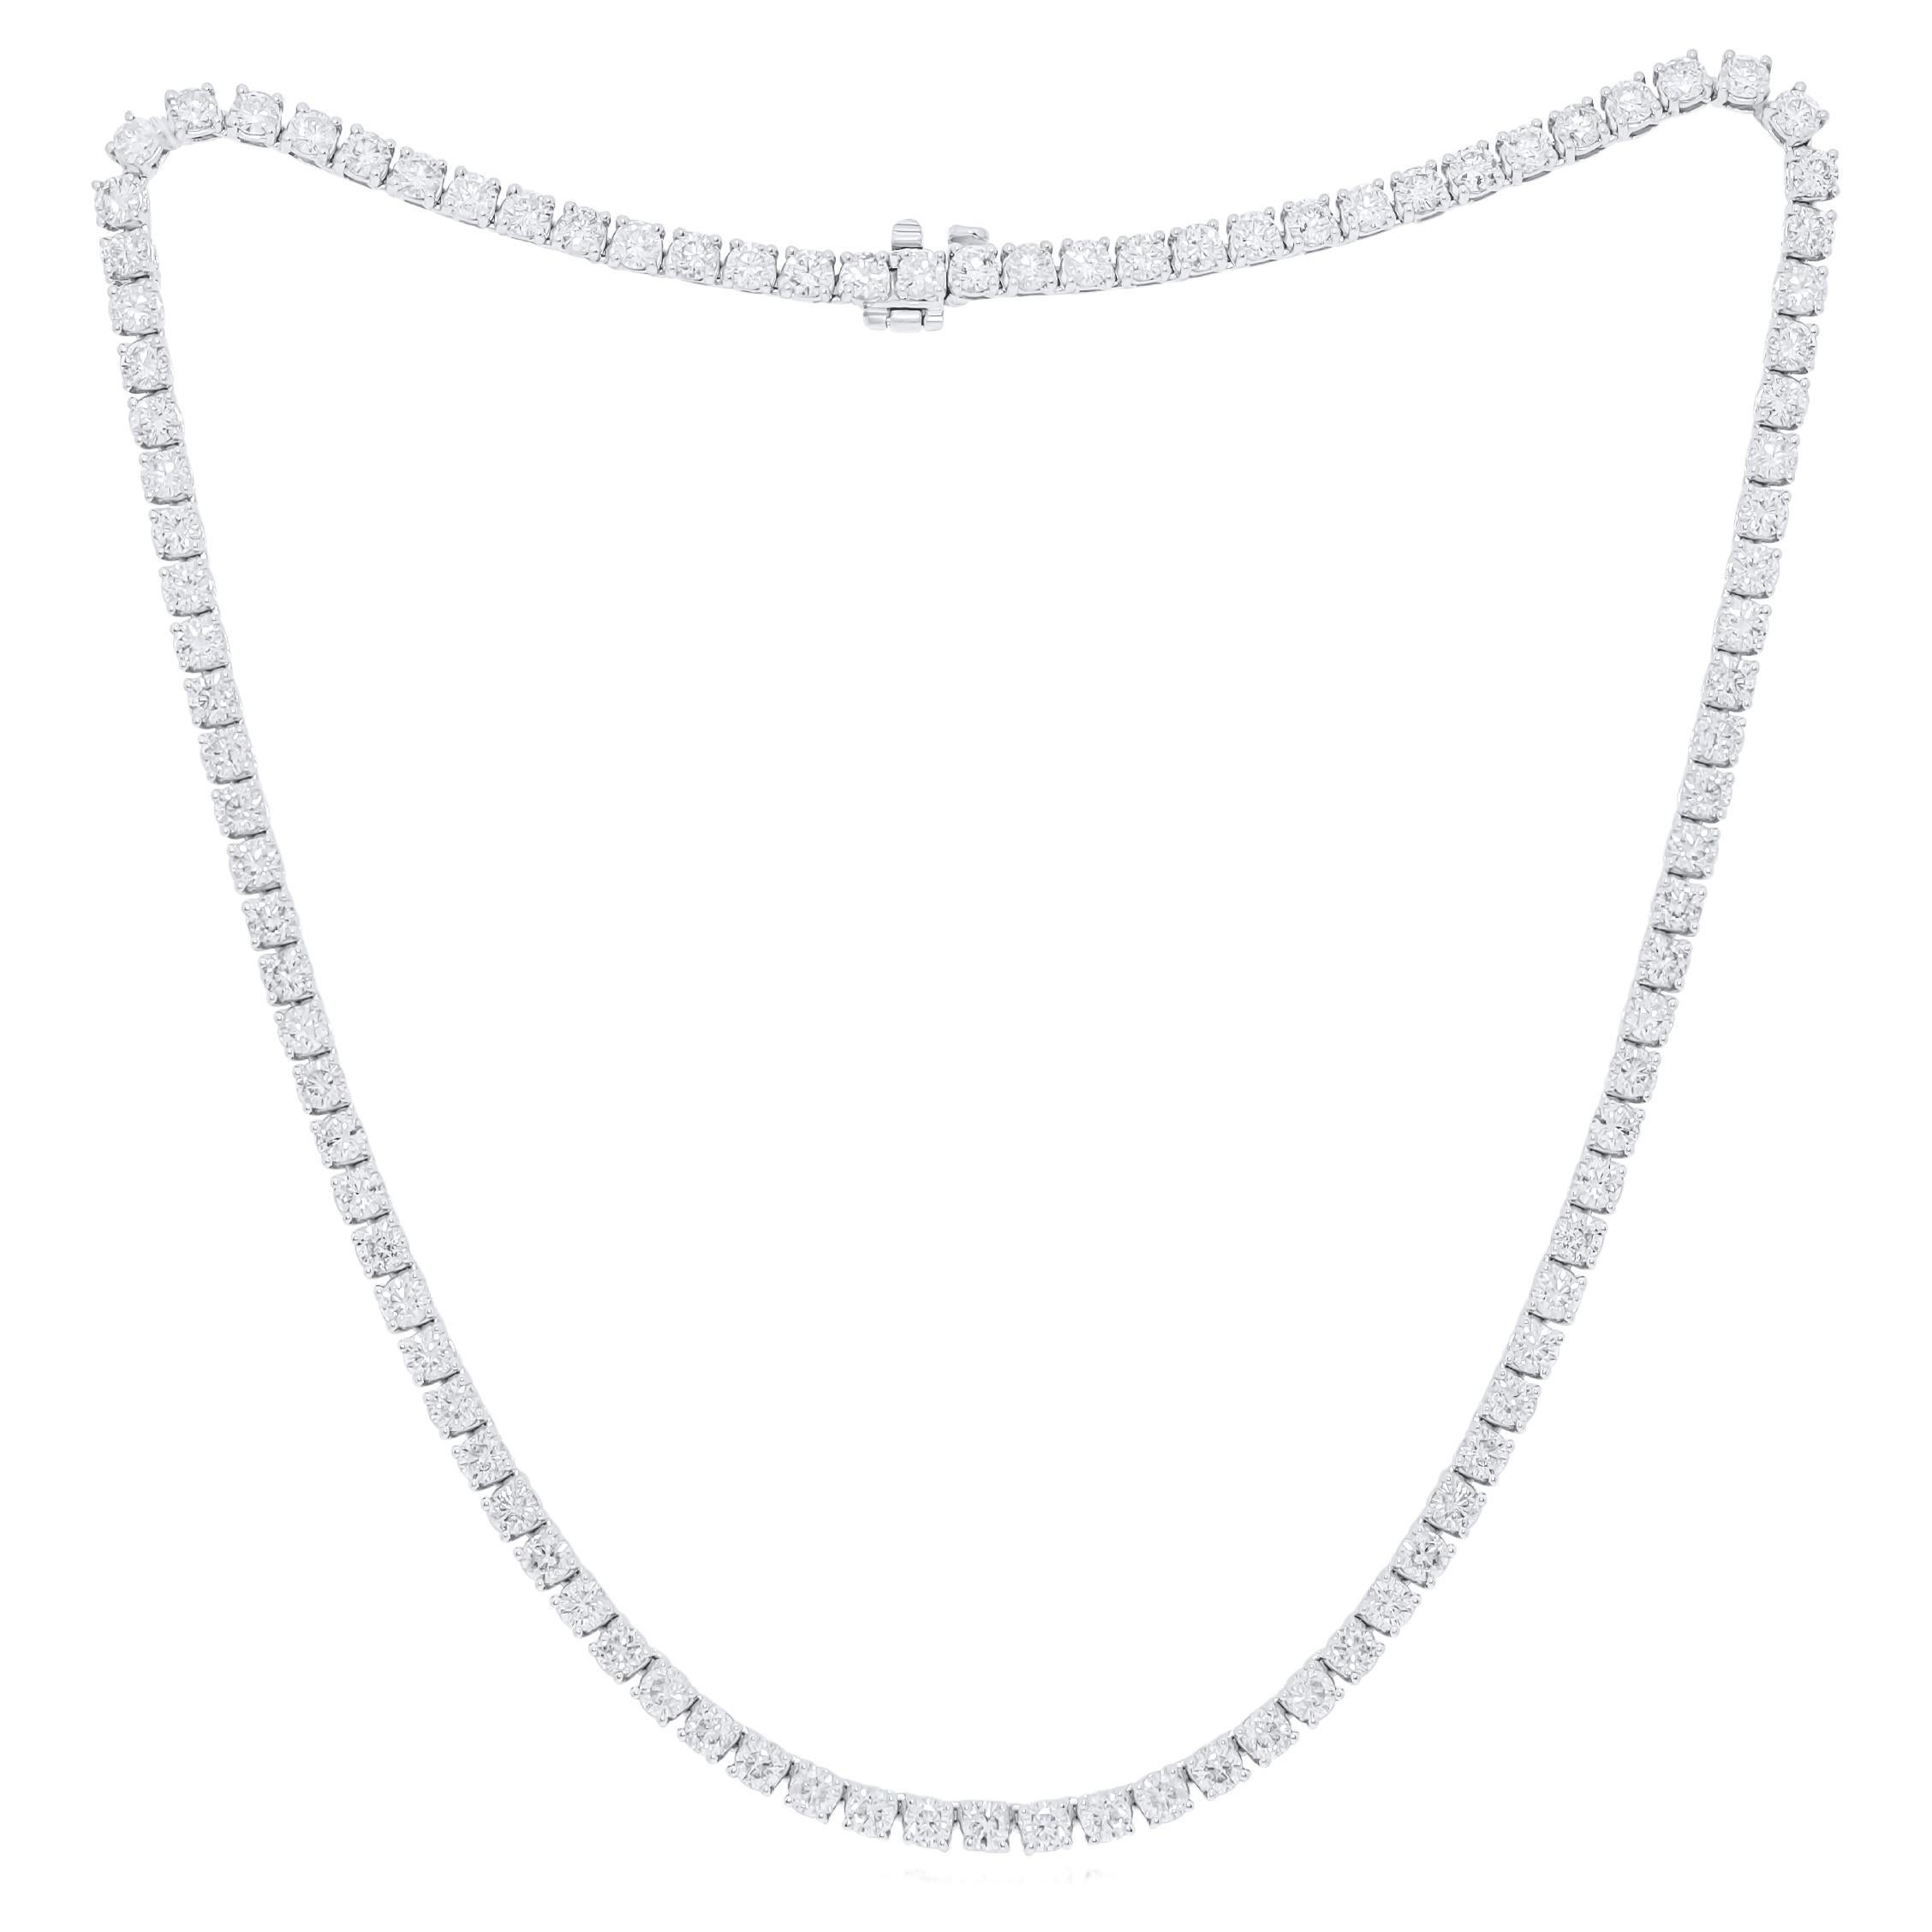 Diana M. Custom 24.60 Cts Round  4 Prong Diamond 18k White Gold Tennis Necklace  For Sale